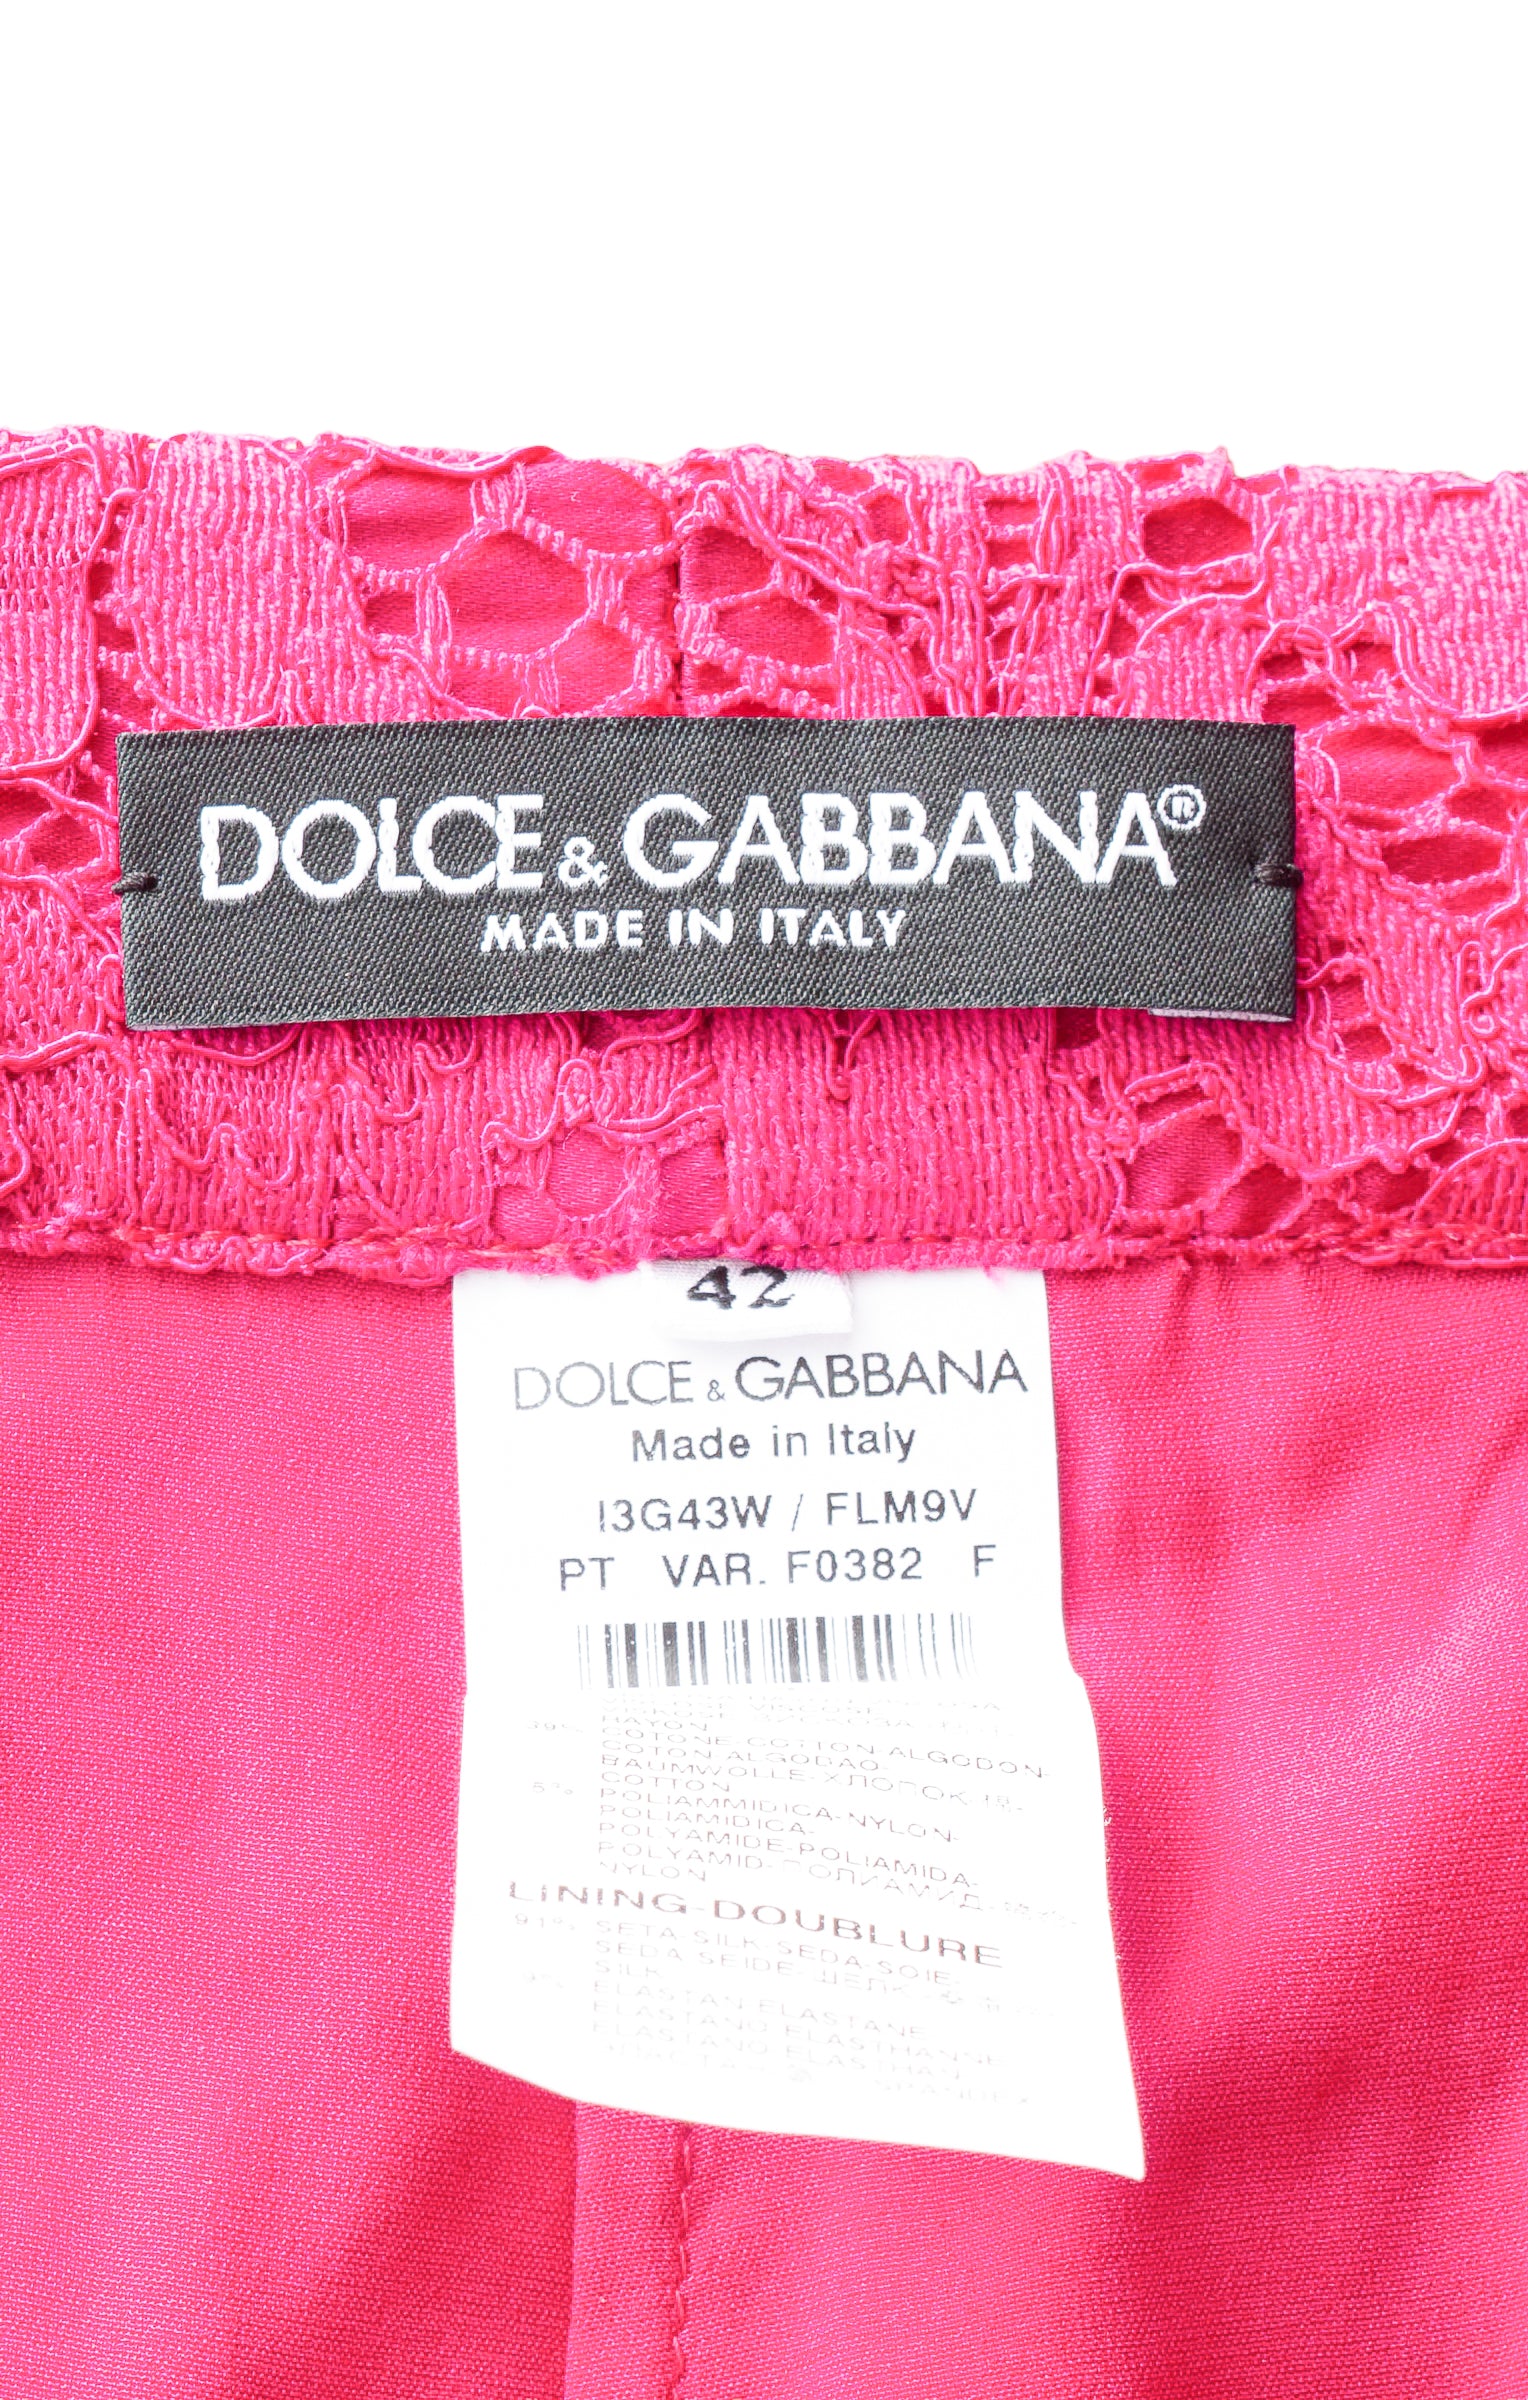 DOLCE & GABBANA (RARE) 3-Piece Suit Size: Jacket - No size tags, fits like US 4 Top - M Pants - IT 42 / Comparable to US 6